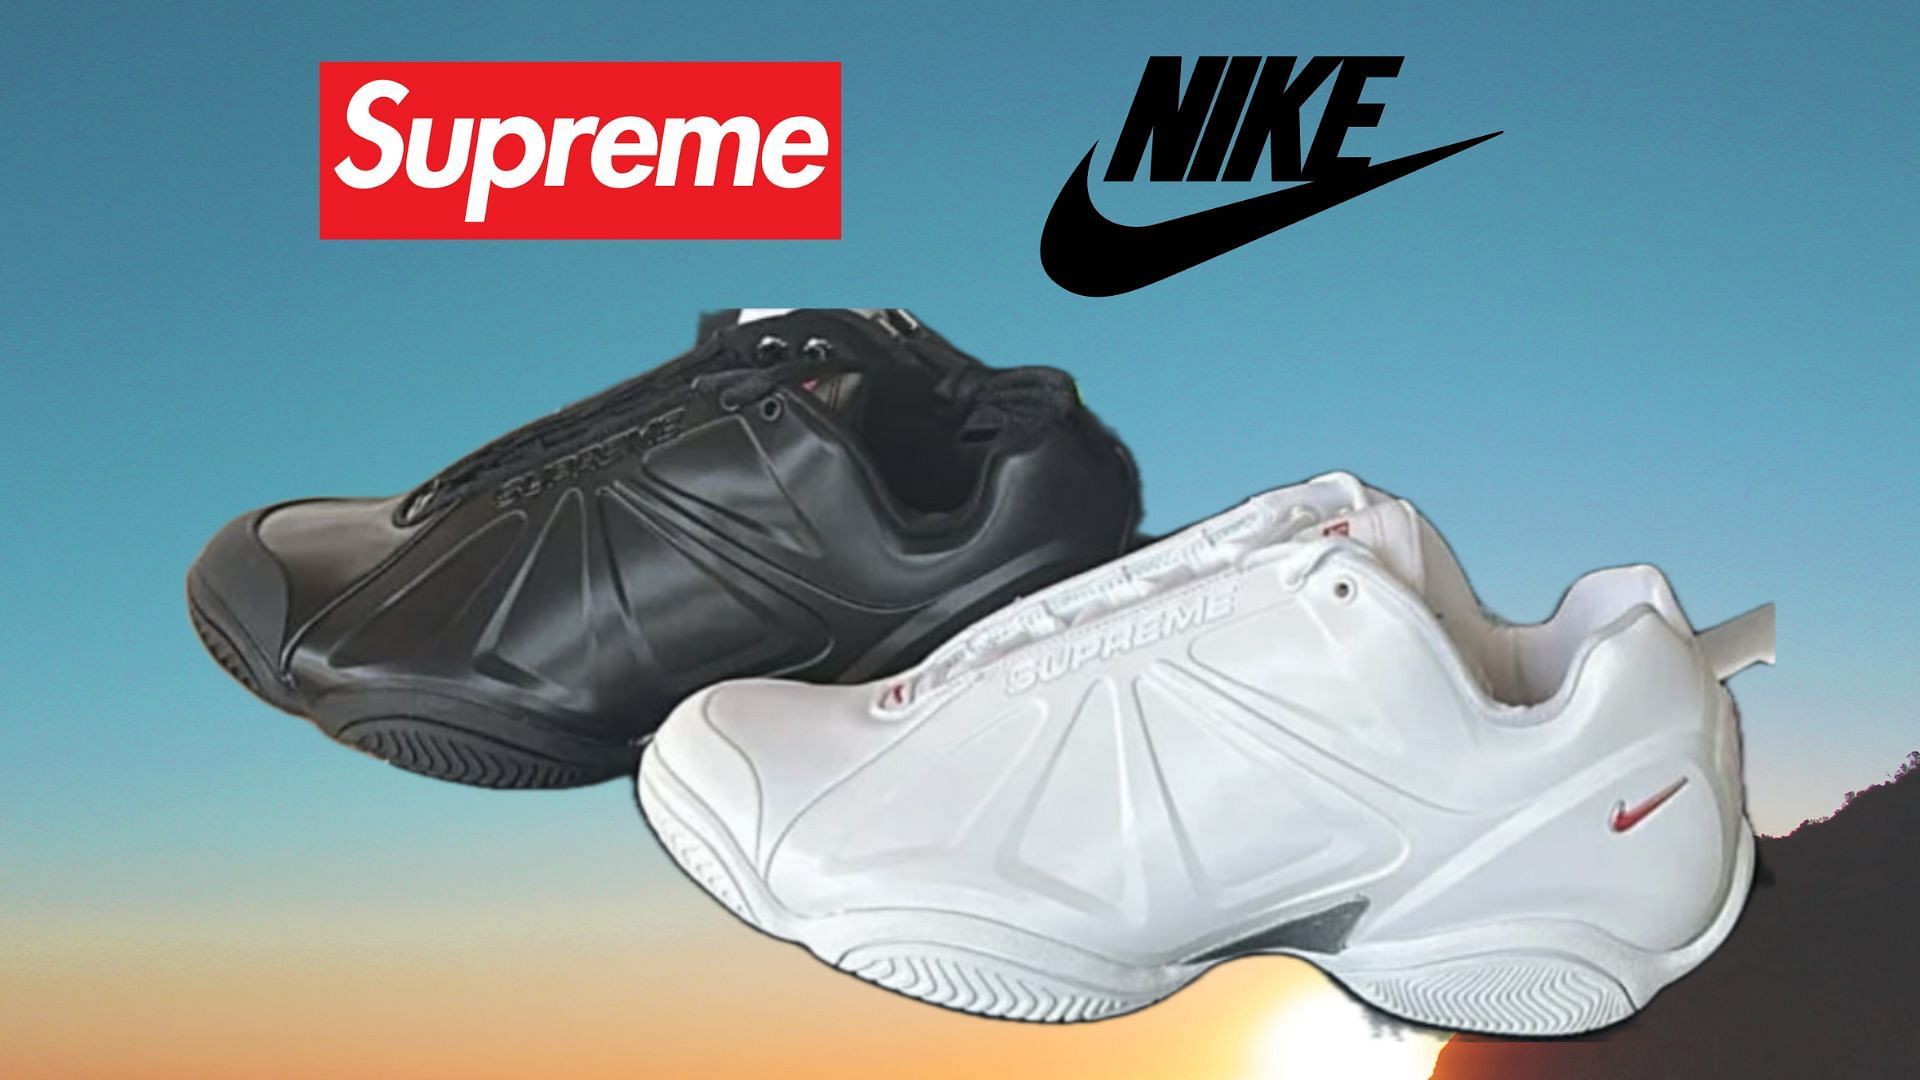 Supreme: Supreme x Nike Air Zoom Courtposite SP sneaker pack